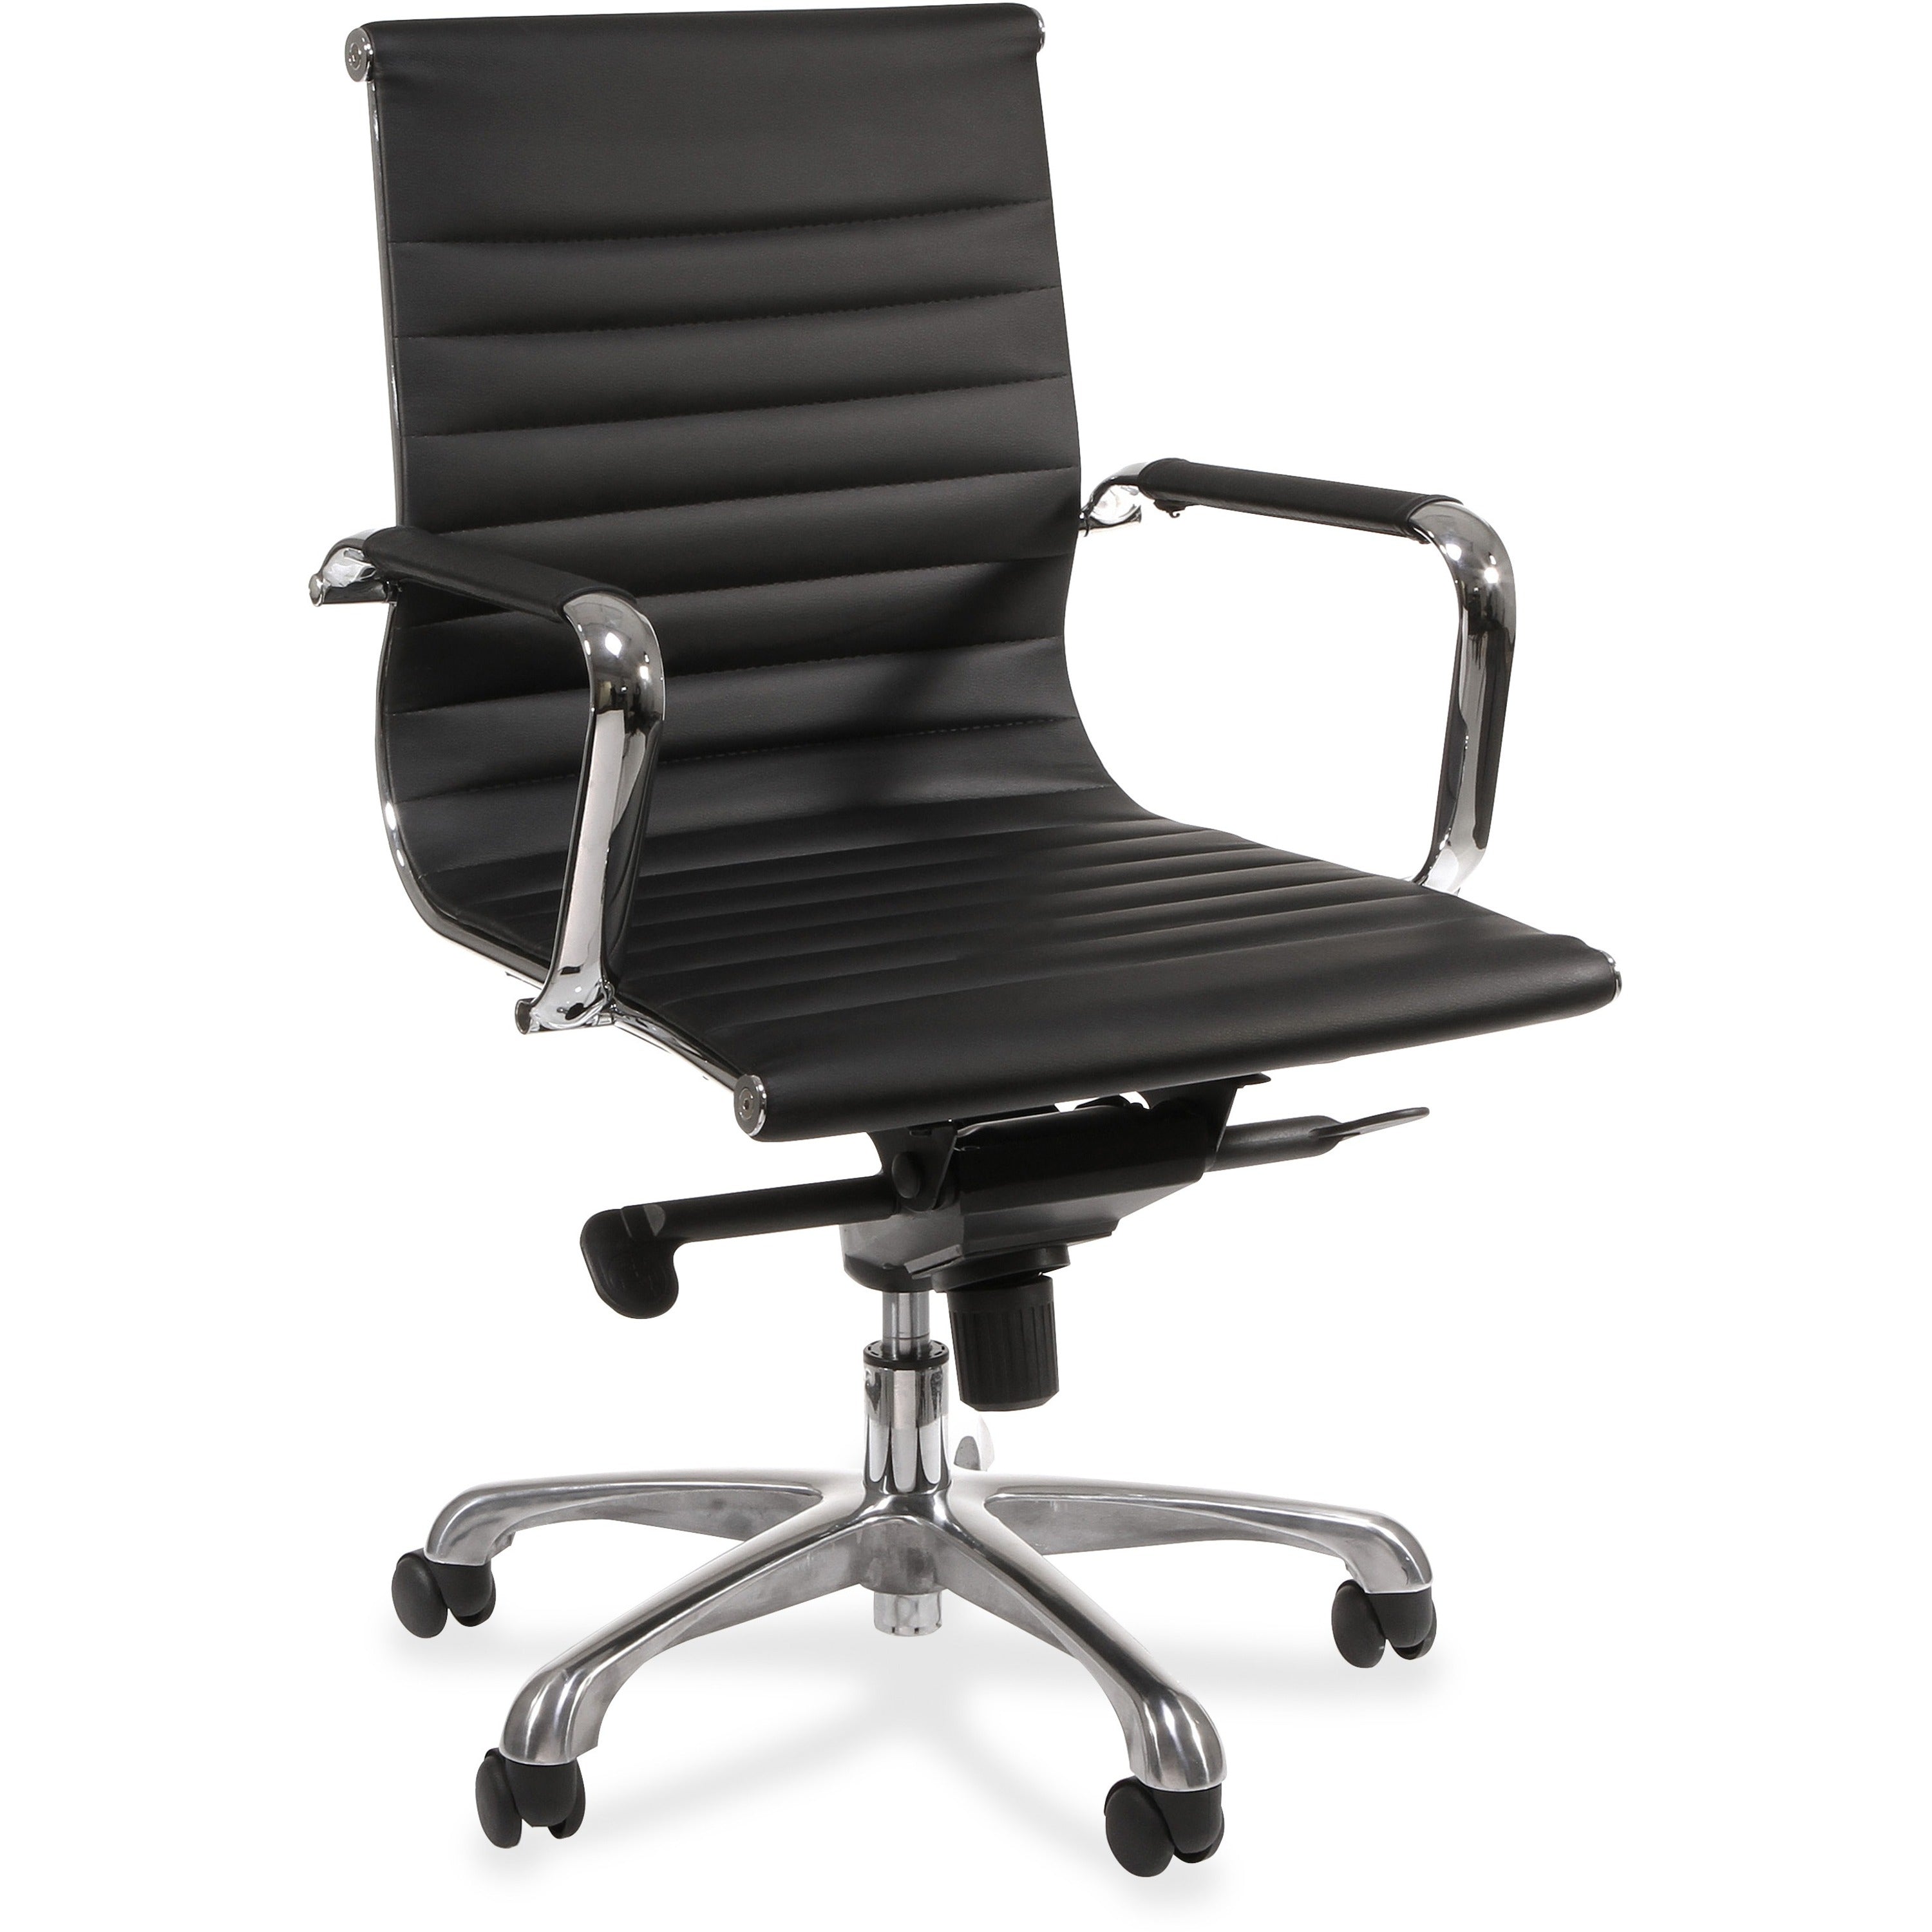 Lorell Modern Managerial Mid-back Office Chair - Leather Seat - Leather Back - Mid Back - 5-star Base - Black - 1 Each - 